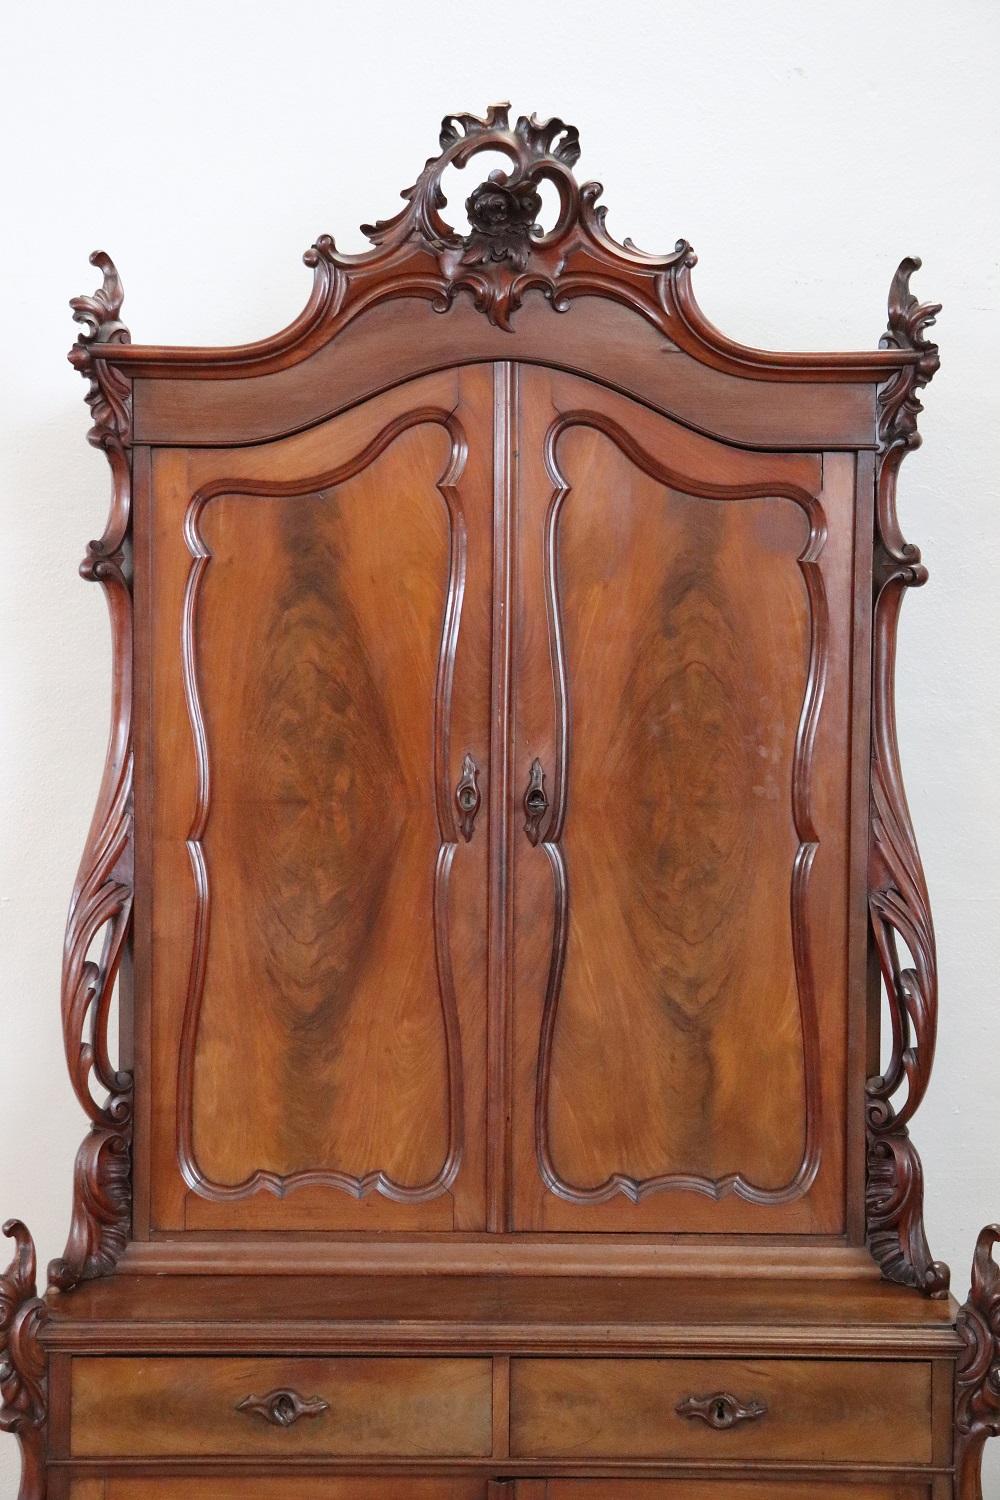 Hand-Carved Rare Italian Art Nouveau Carved Mahogany Sideboard or Cabinet